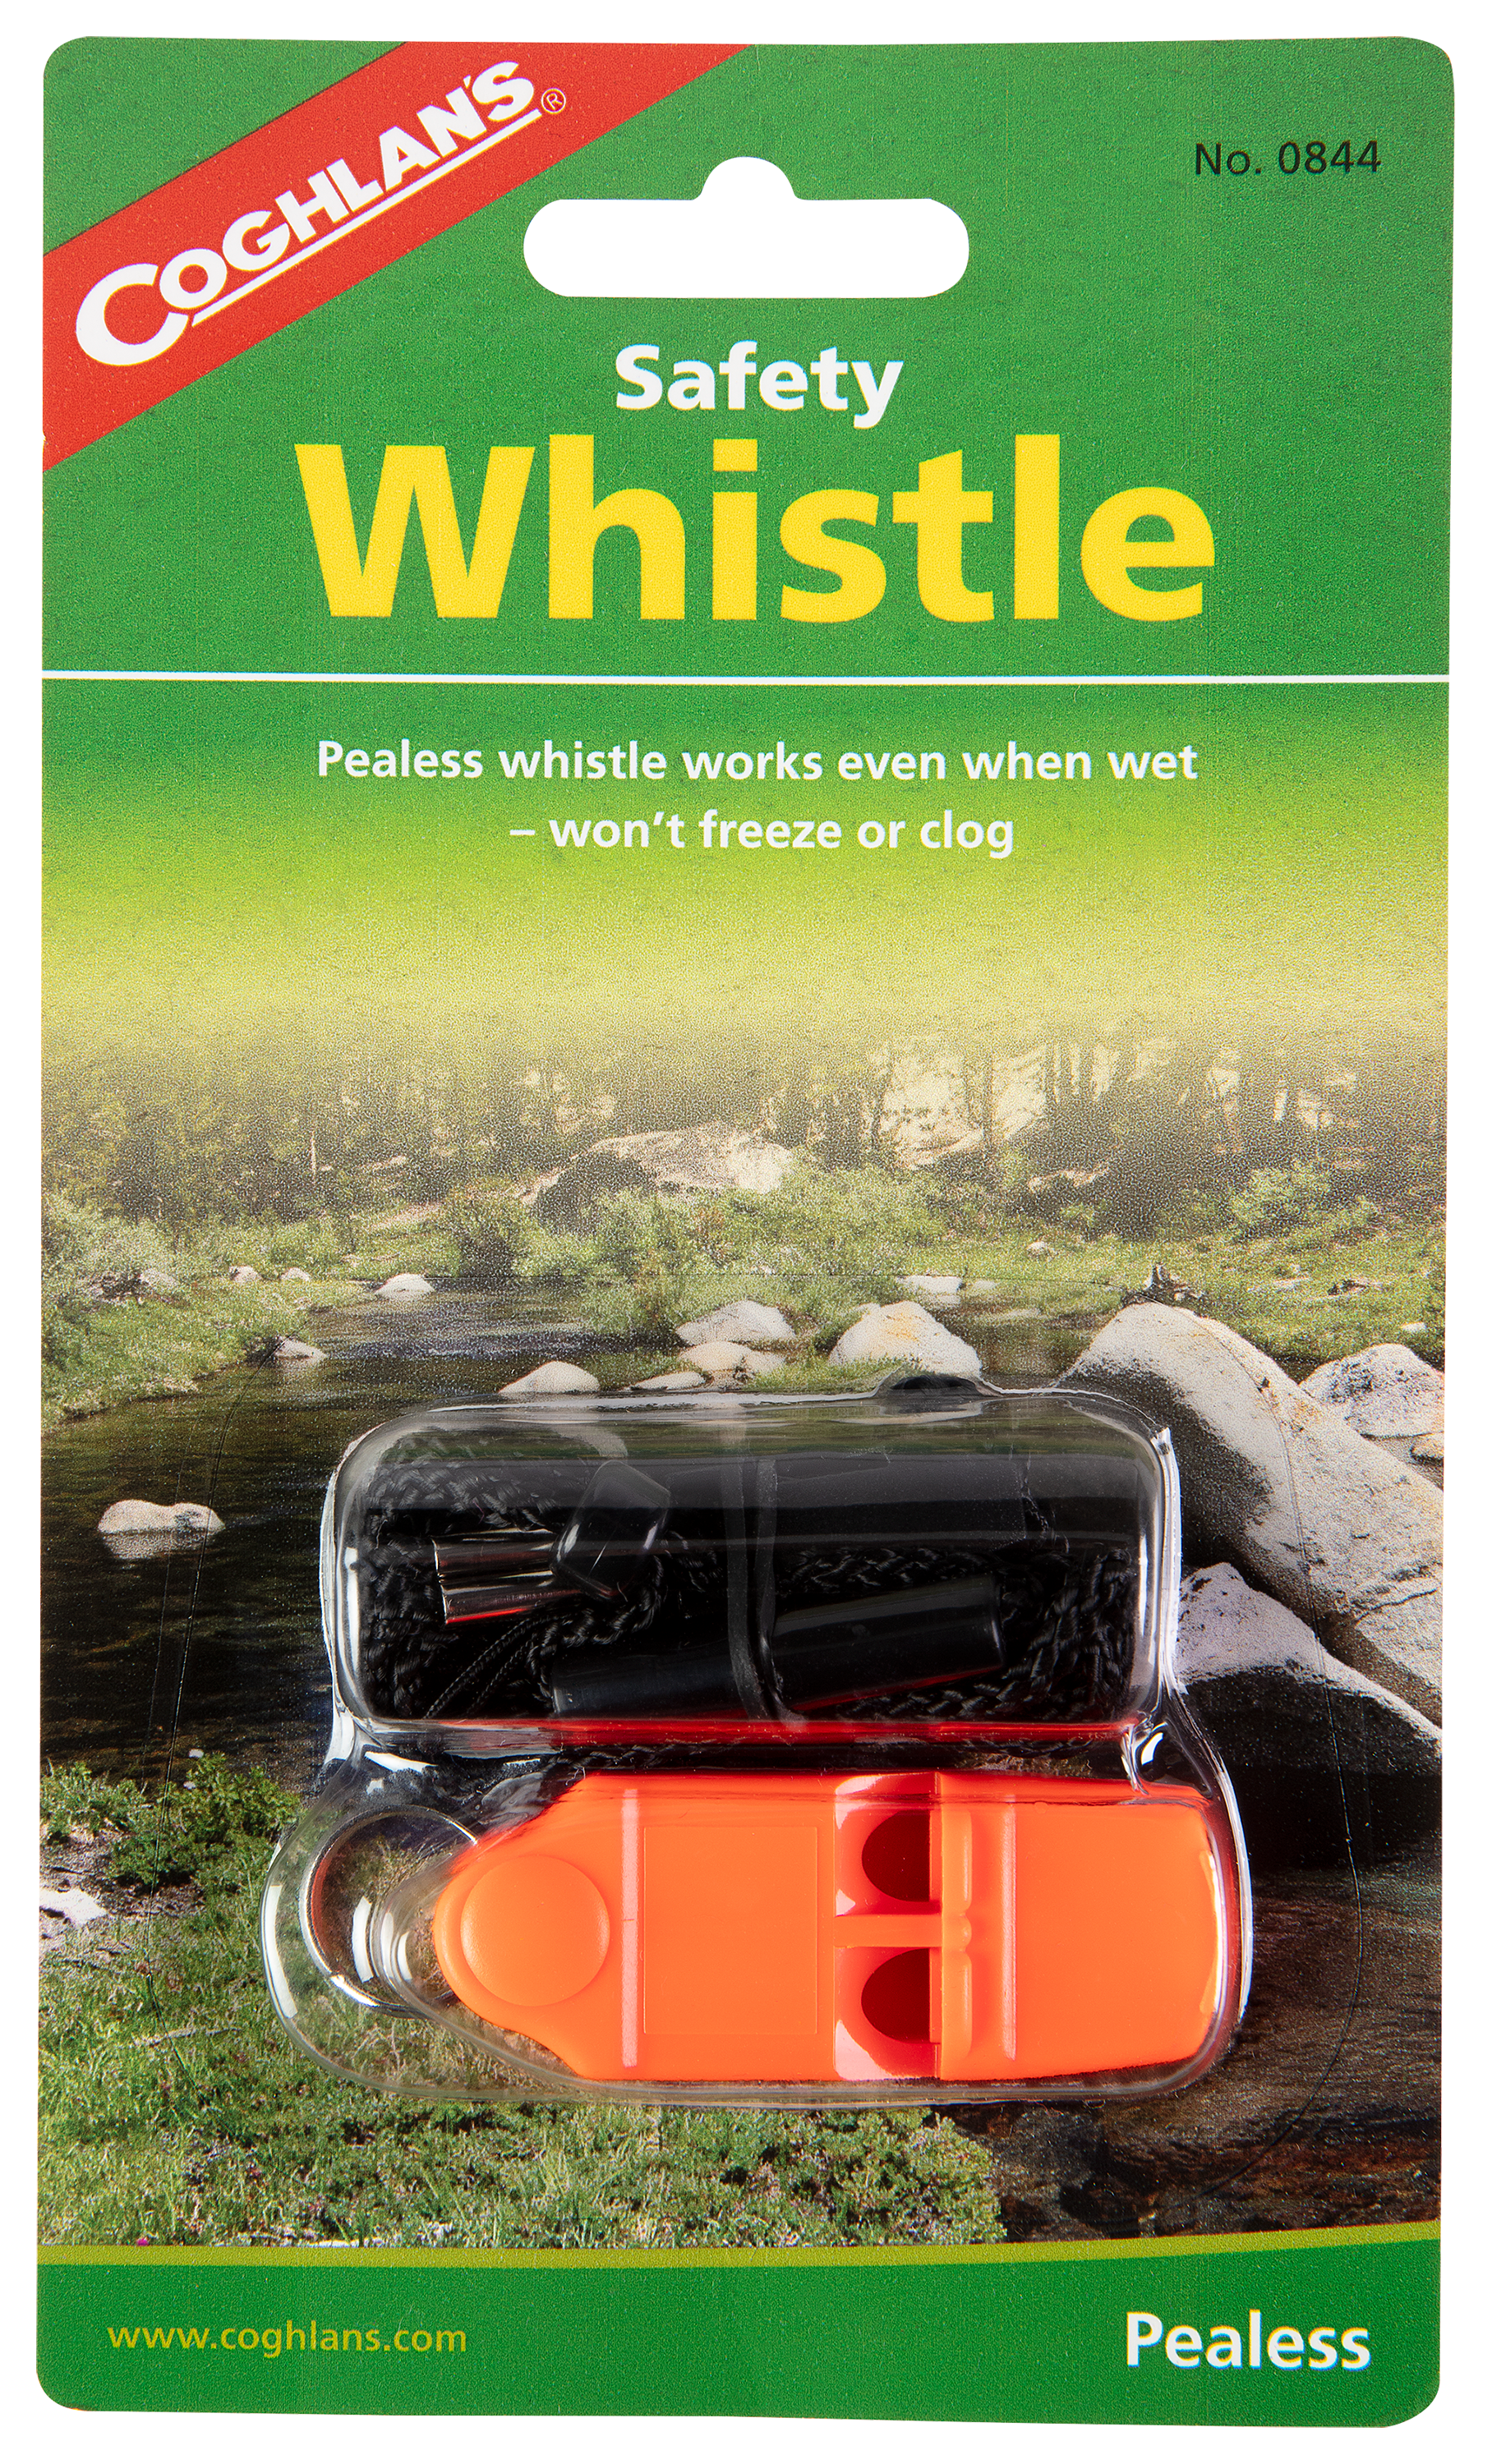 Coghlan's Pealess Safety Whistle